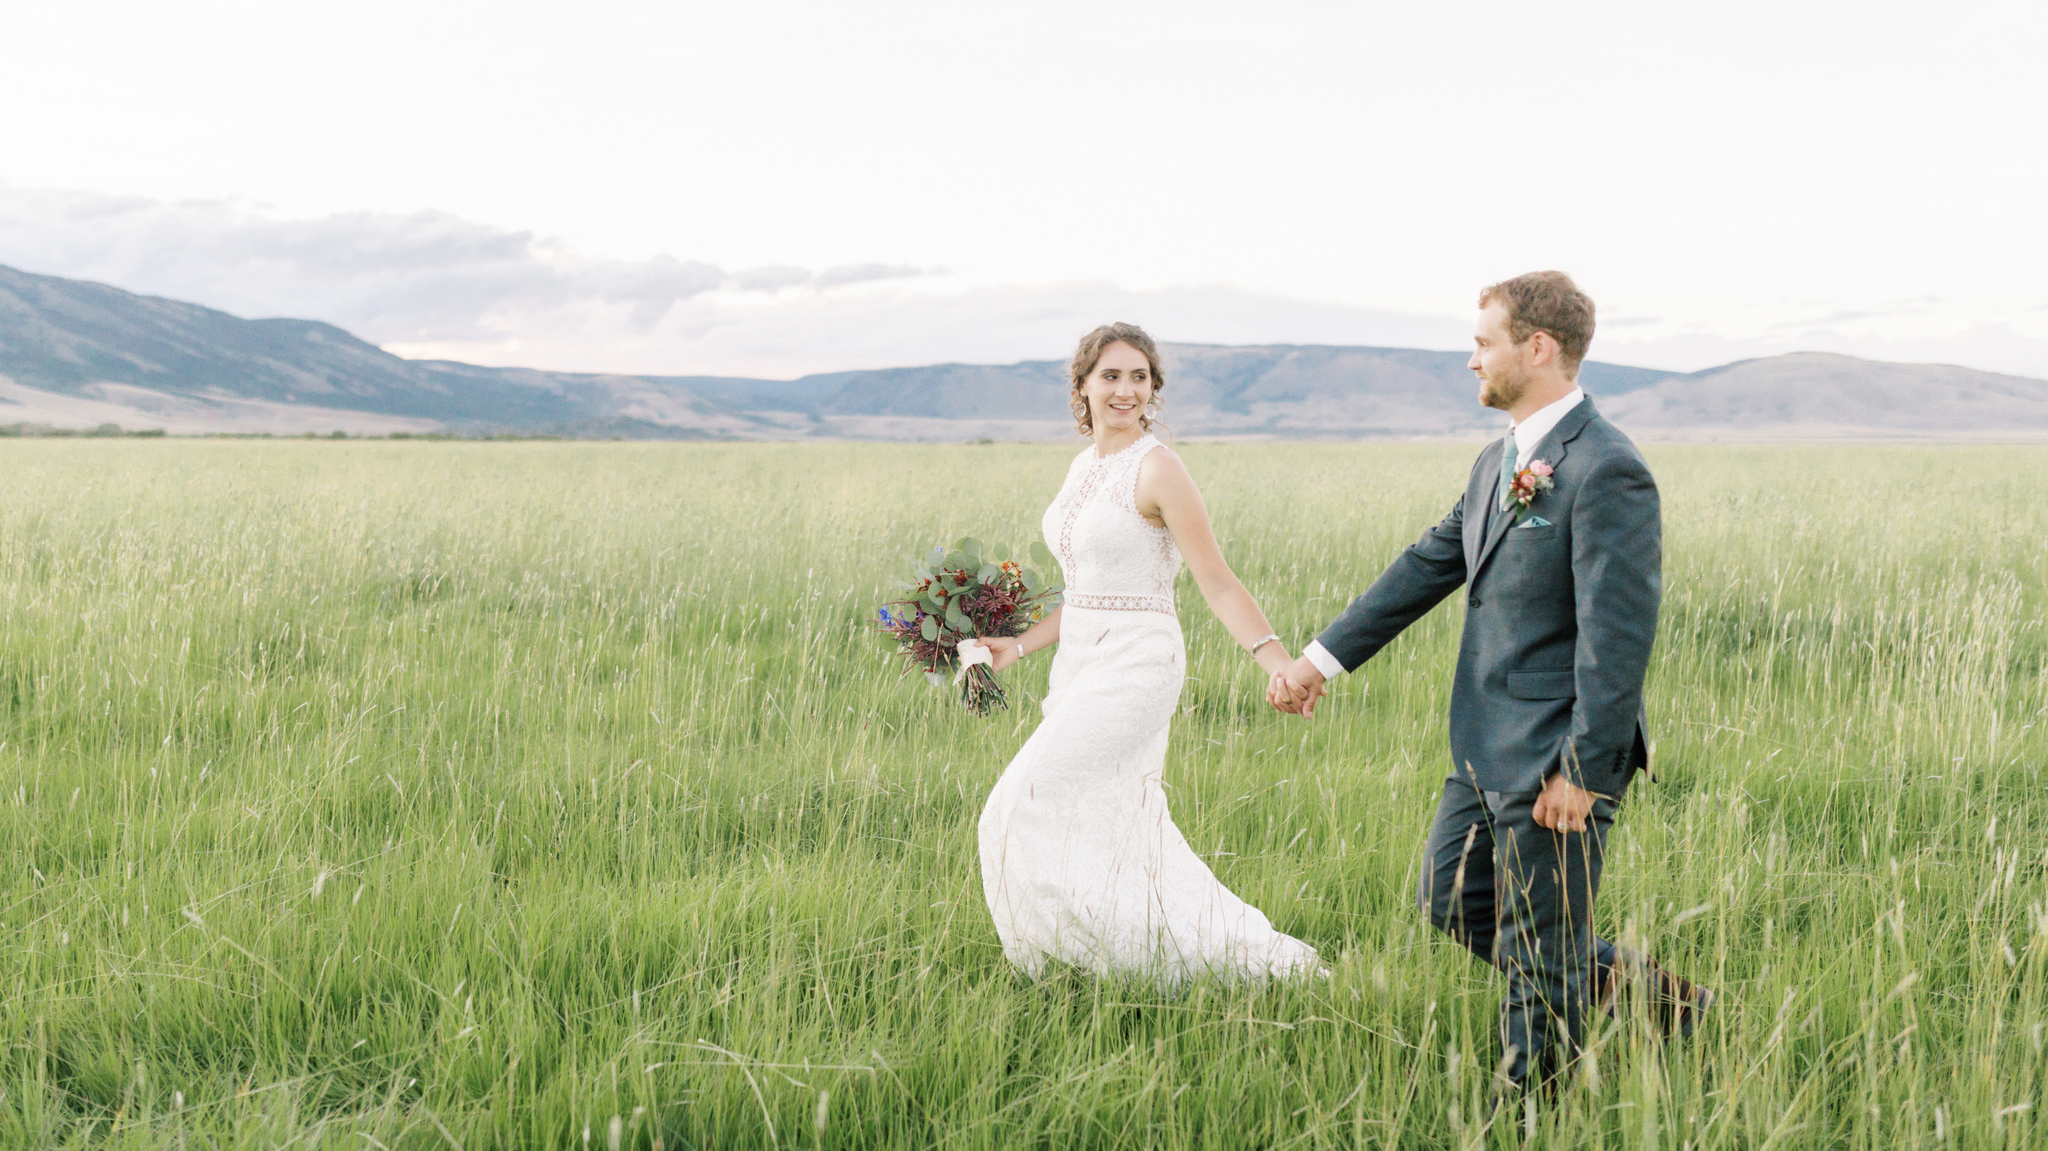 The Ultimate Romantic Wedding Surrounded by Majestic Mountain Views